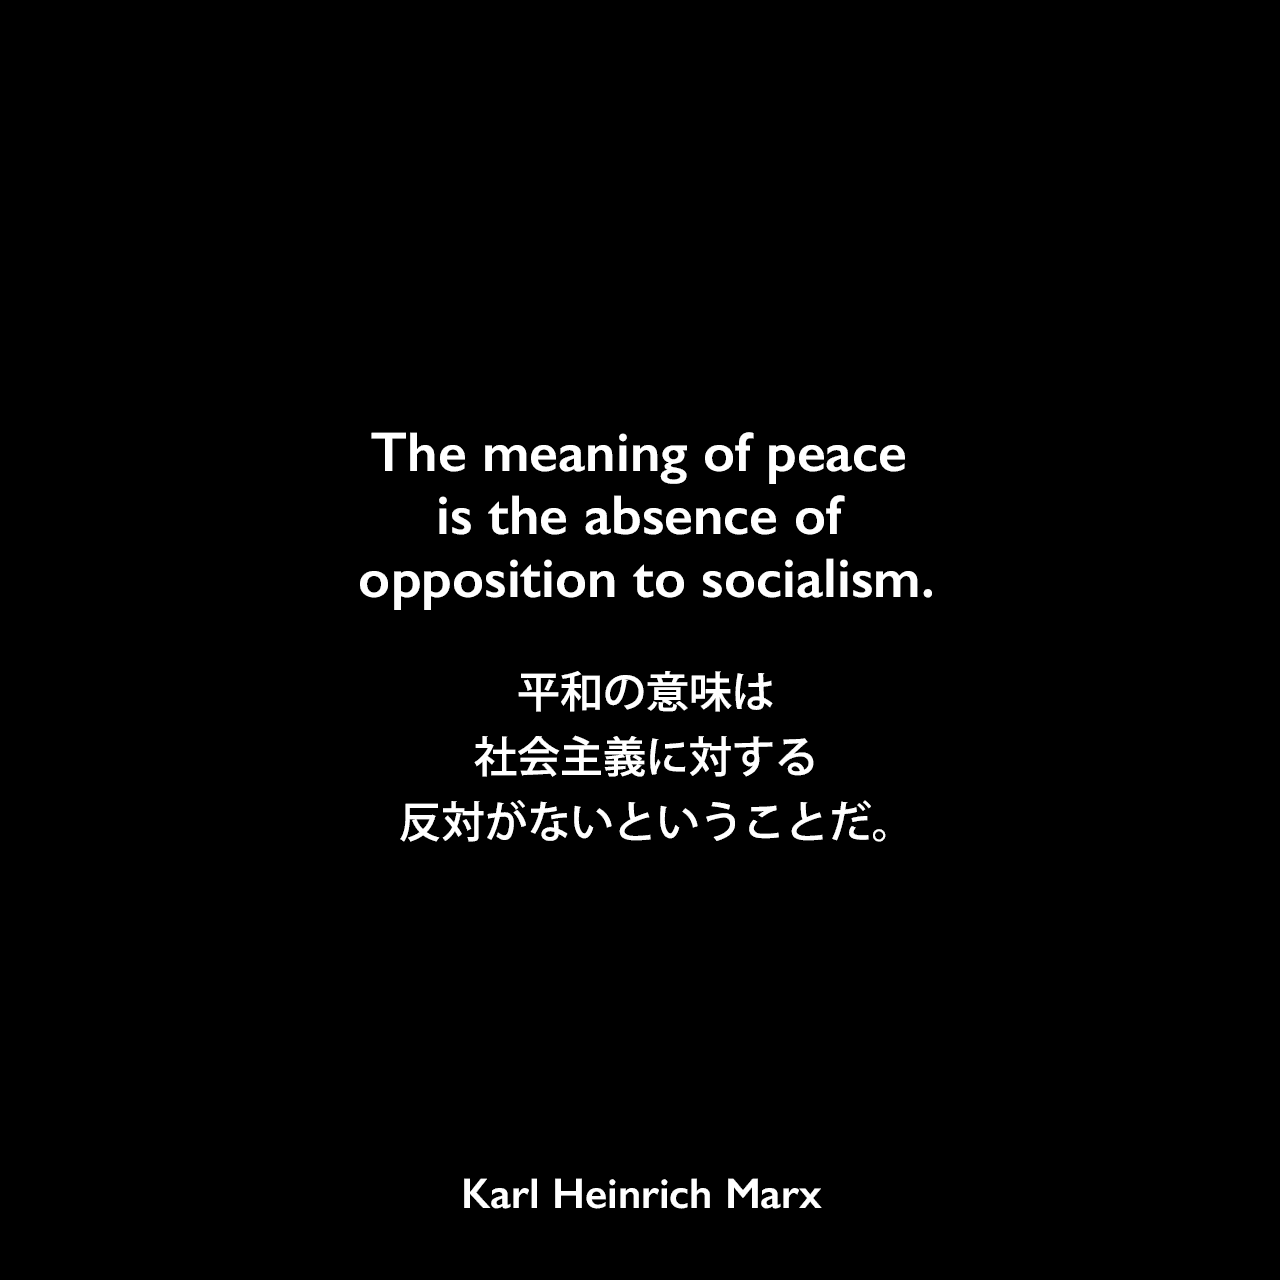 The meaning of peace is the absence of opposition to socialism.平和の意味は、社会主義に対する反対がないということだ。Karl Heinrich Marx